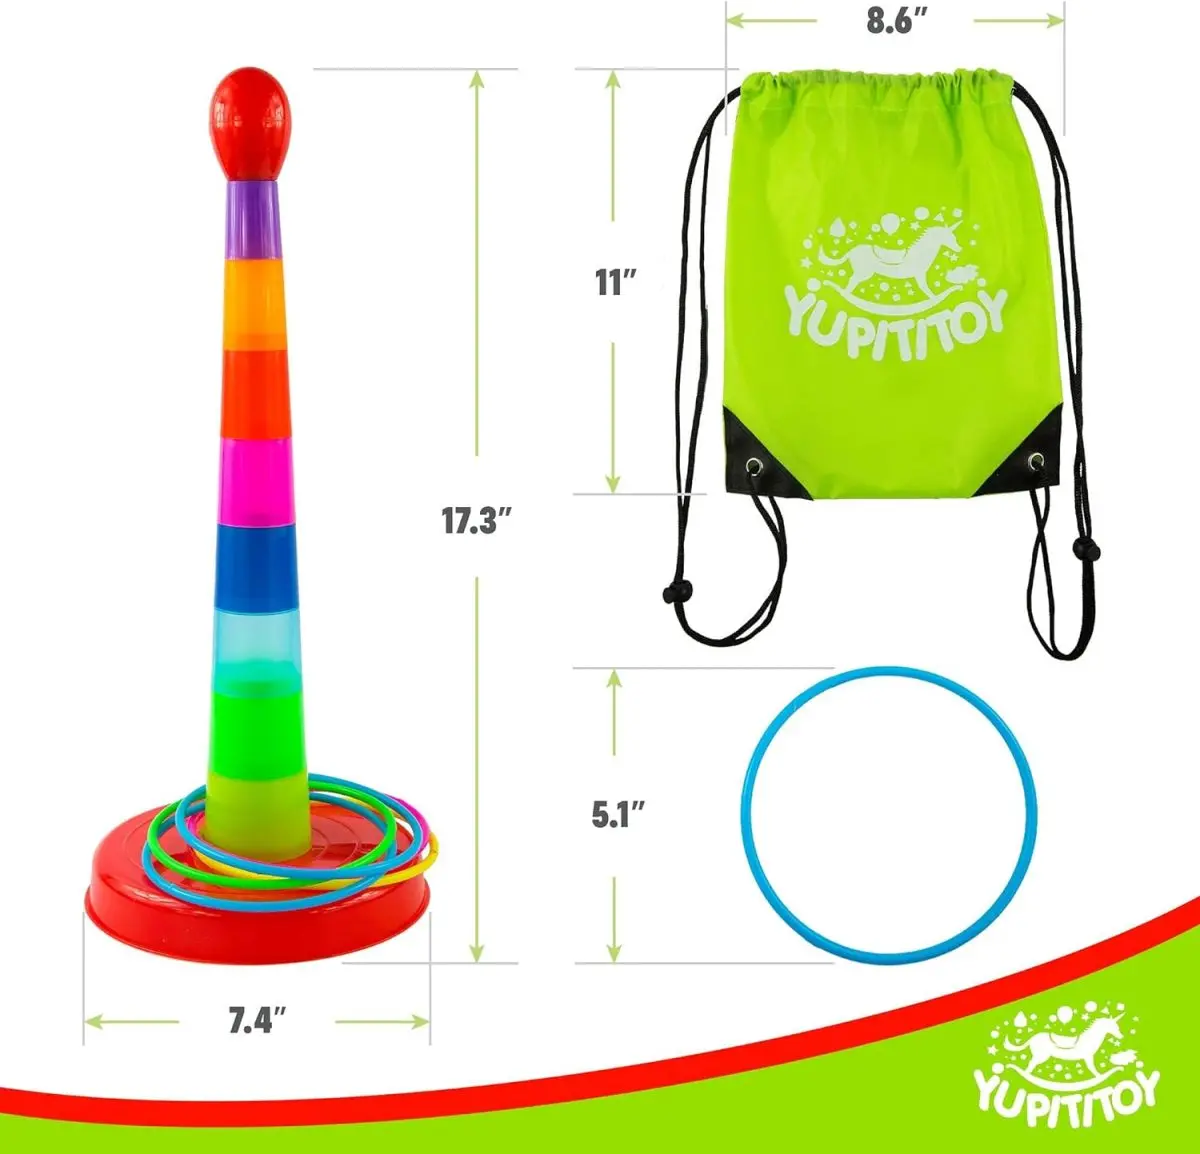 YUPITITOY Cone Ring Toss Game for Kids with 8 Throwing Rings and Travel Bag, Colorful Tossing and Active Play Set, Quick Setup for Indoor and Outdoor Use, Heavy-Duty Plastic